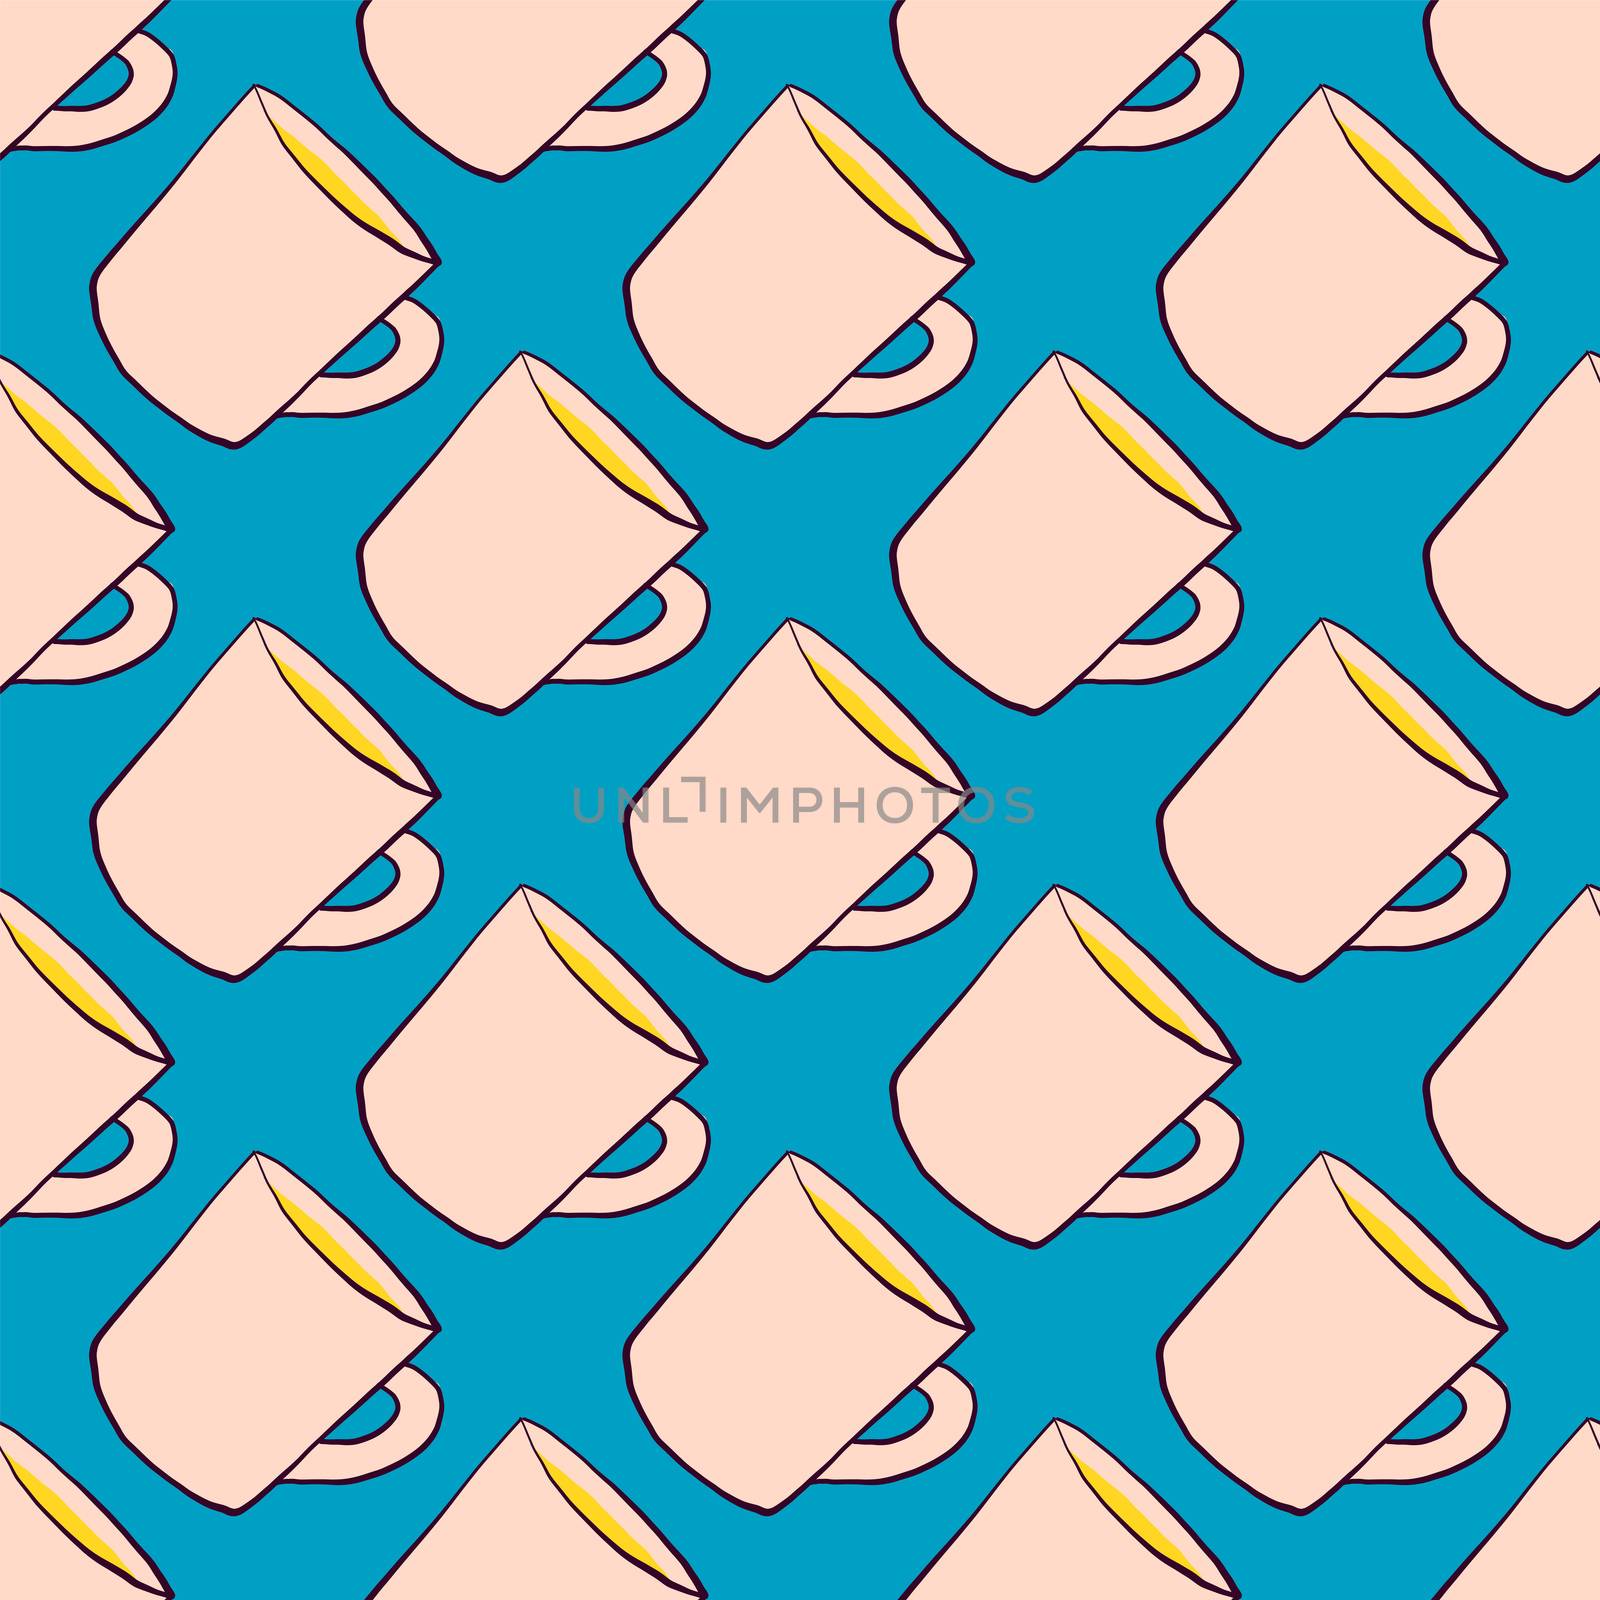 Tea cups pattern , illustration, vector on white background